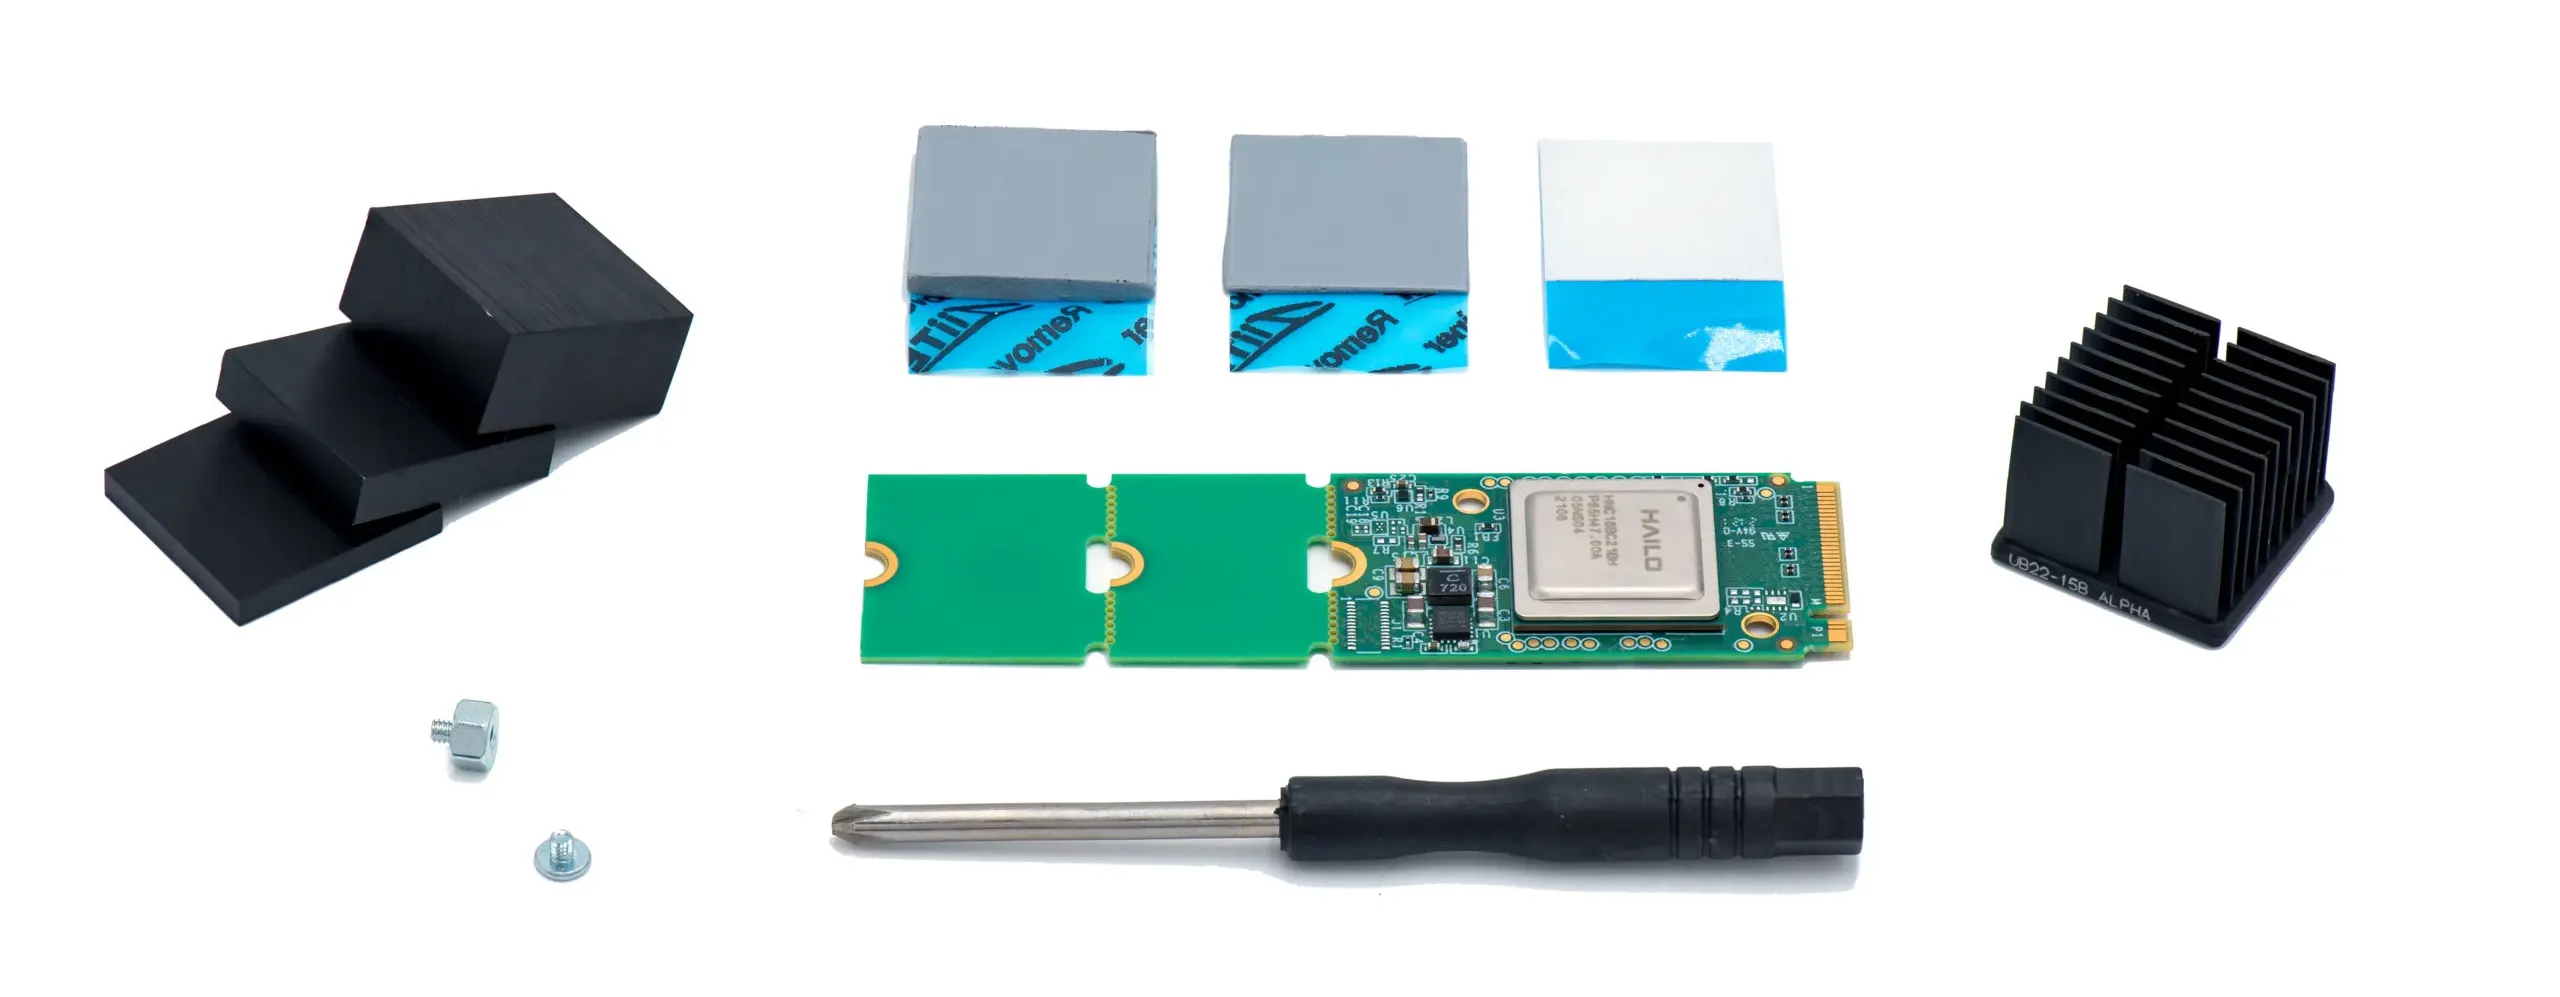 Hailos 8 M.2 Module Processor Chip AI starter kit includes the metal cubes, thermal pads, and thermal adhesive tape for thermal management